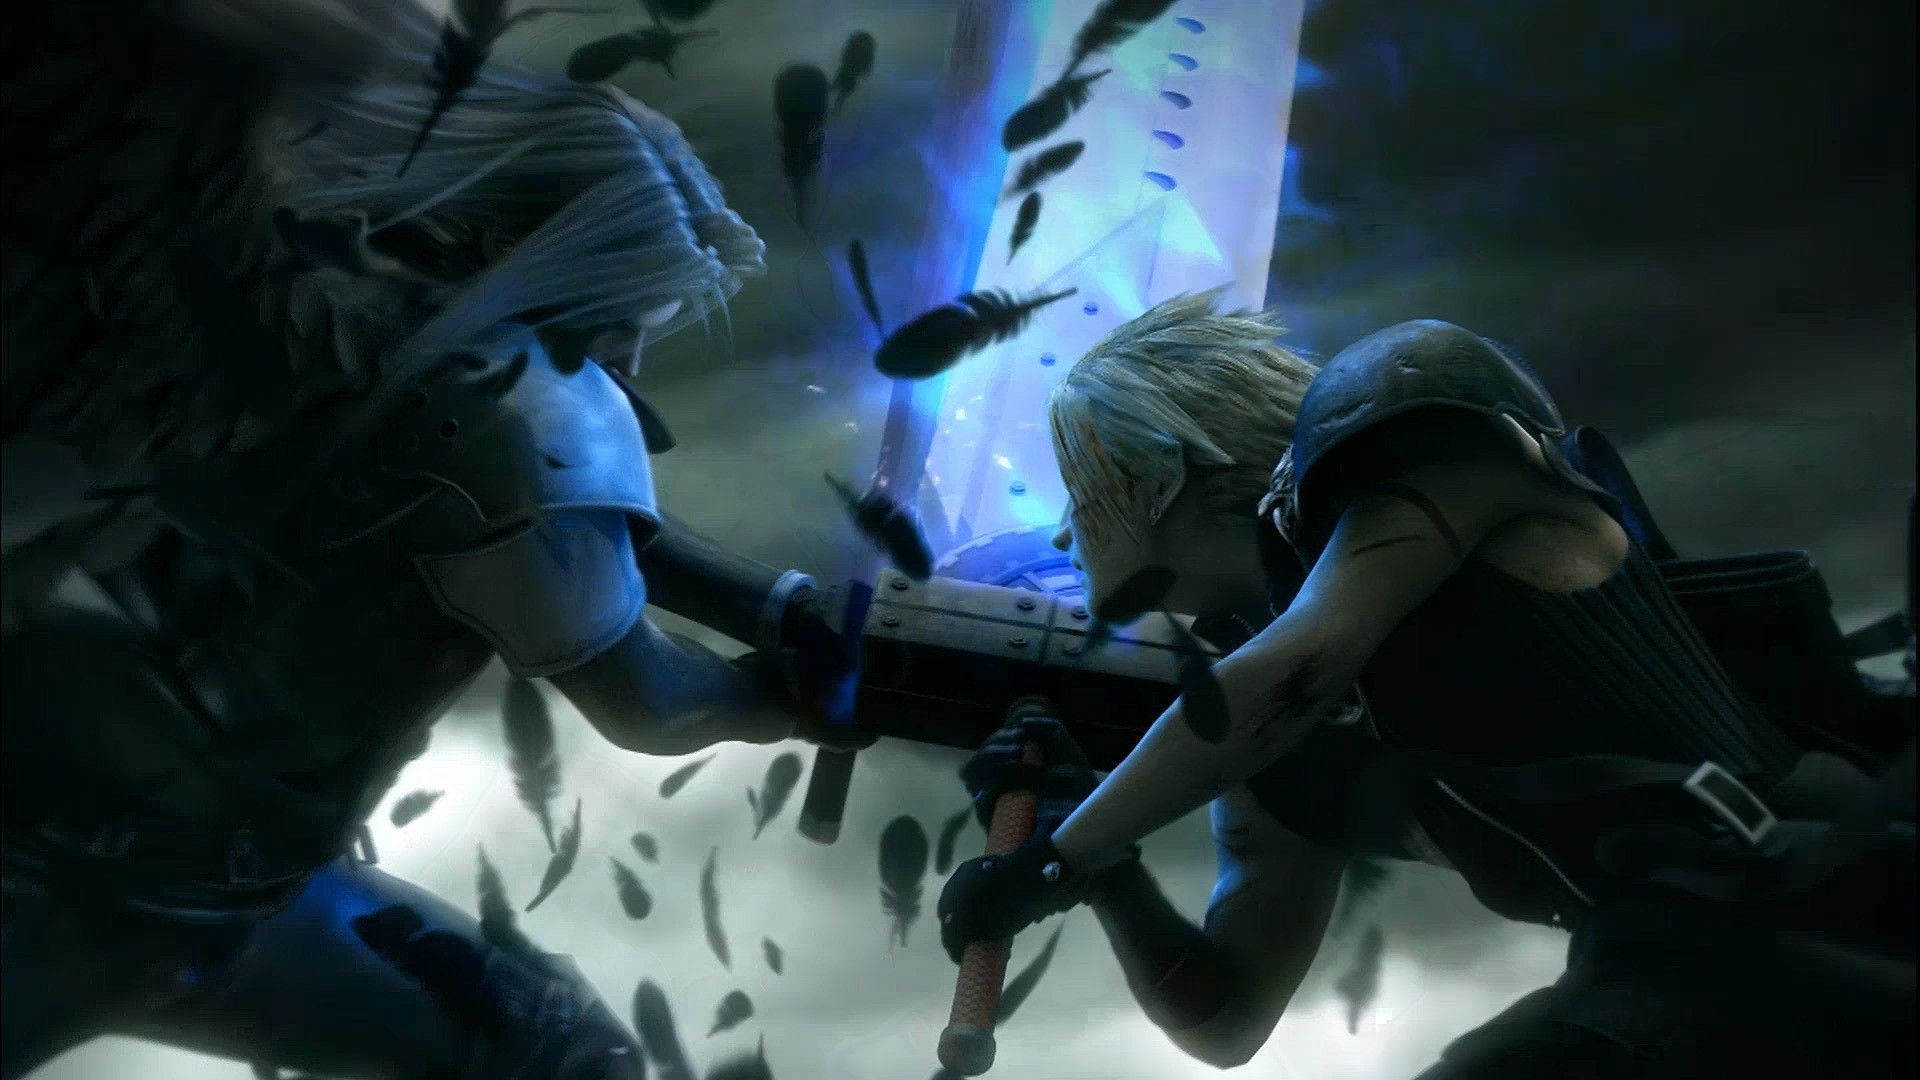 Final Fantasy VII wallpaper ·① Download free awesome full ...